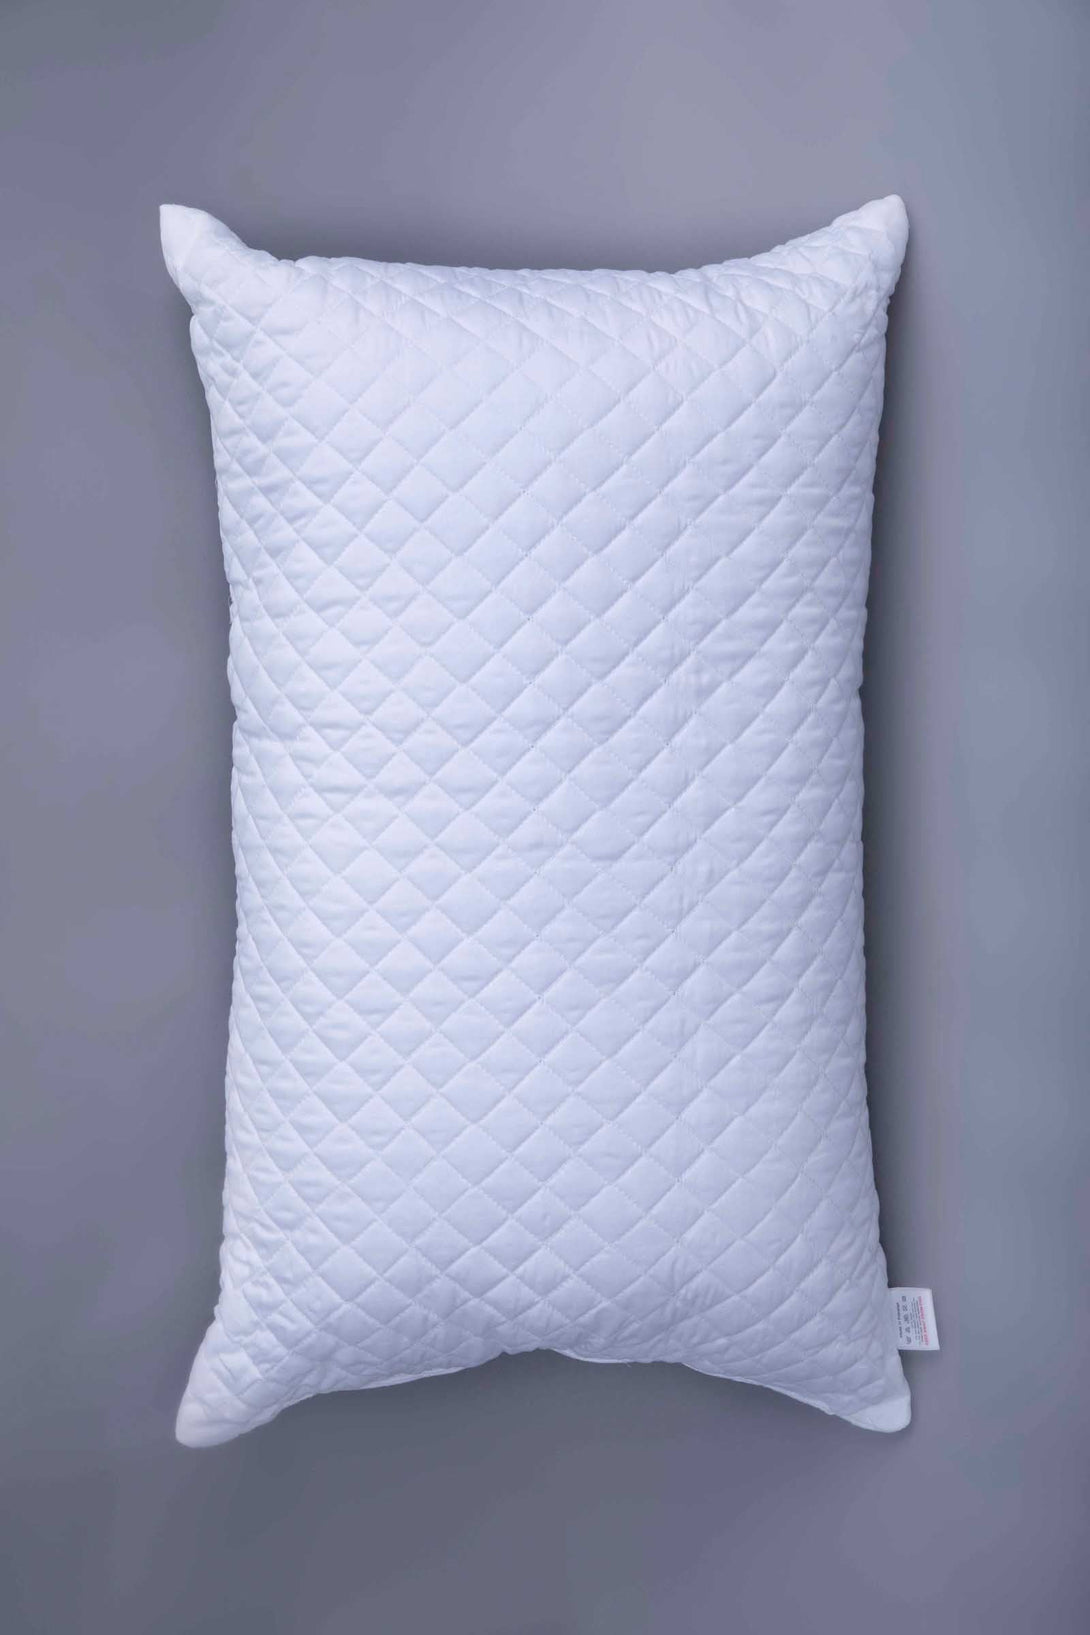 Quilted Pillow - Filling